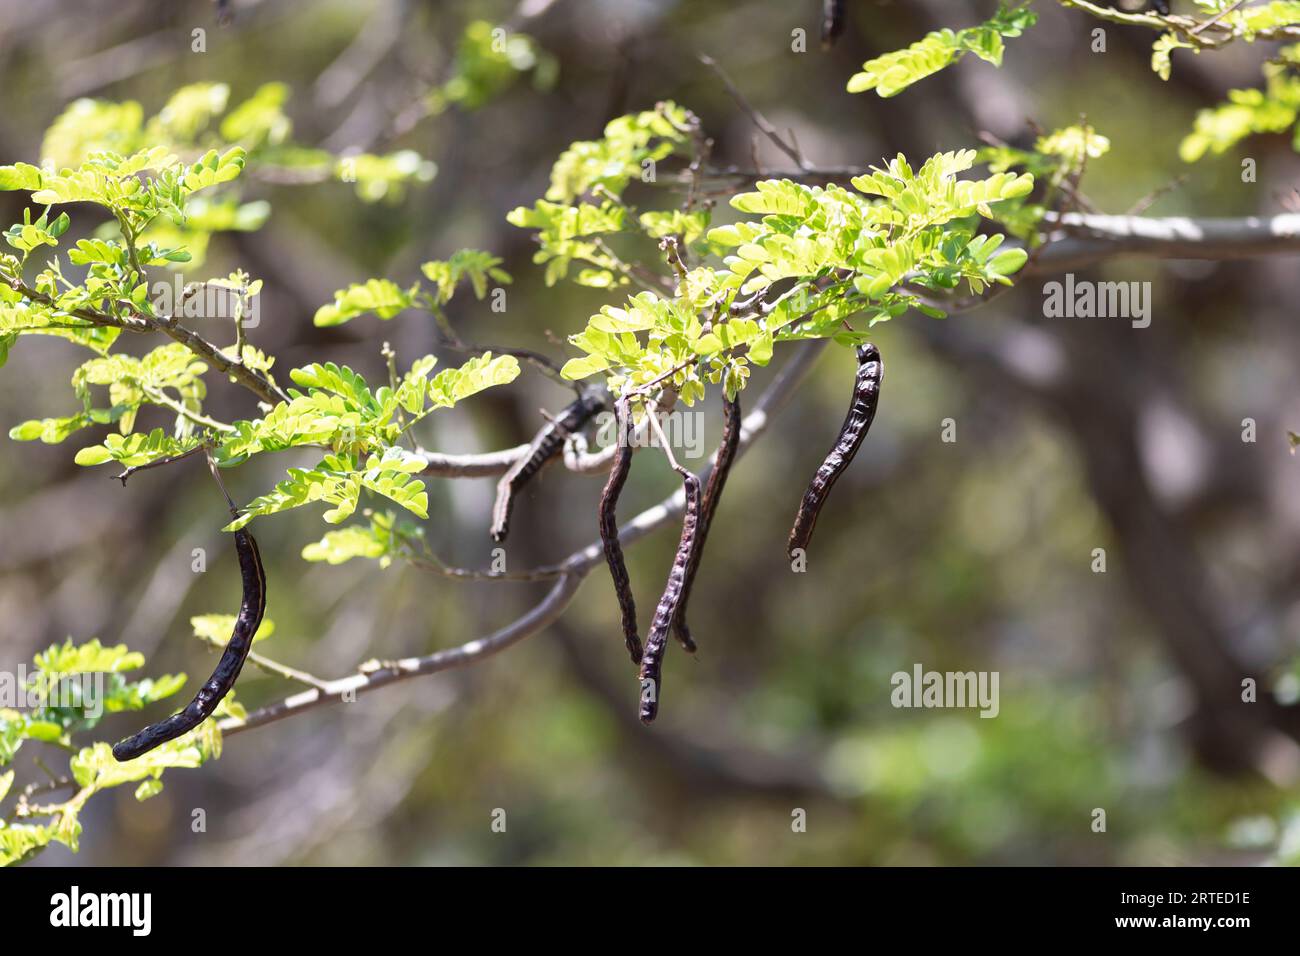 Sunlit, green leaves with long, brown seed pods hanging on a tree branch in Kihei; Maui, Hawaii, United States of America Stock Photo